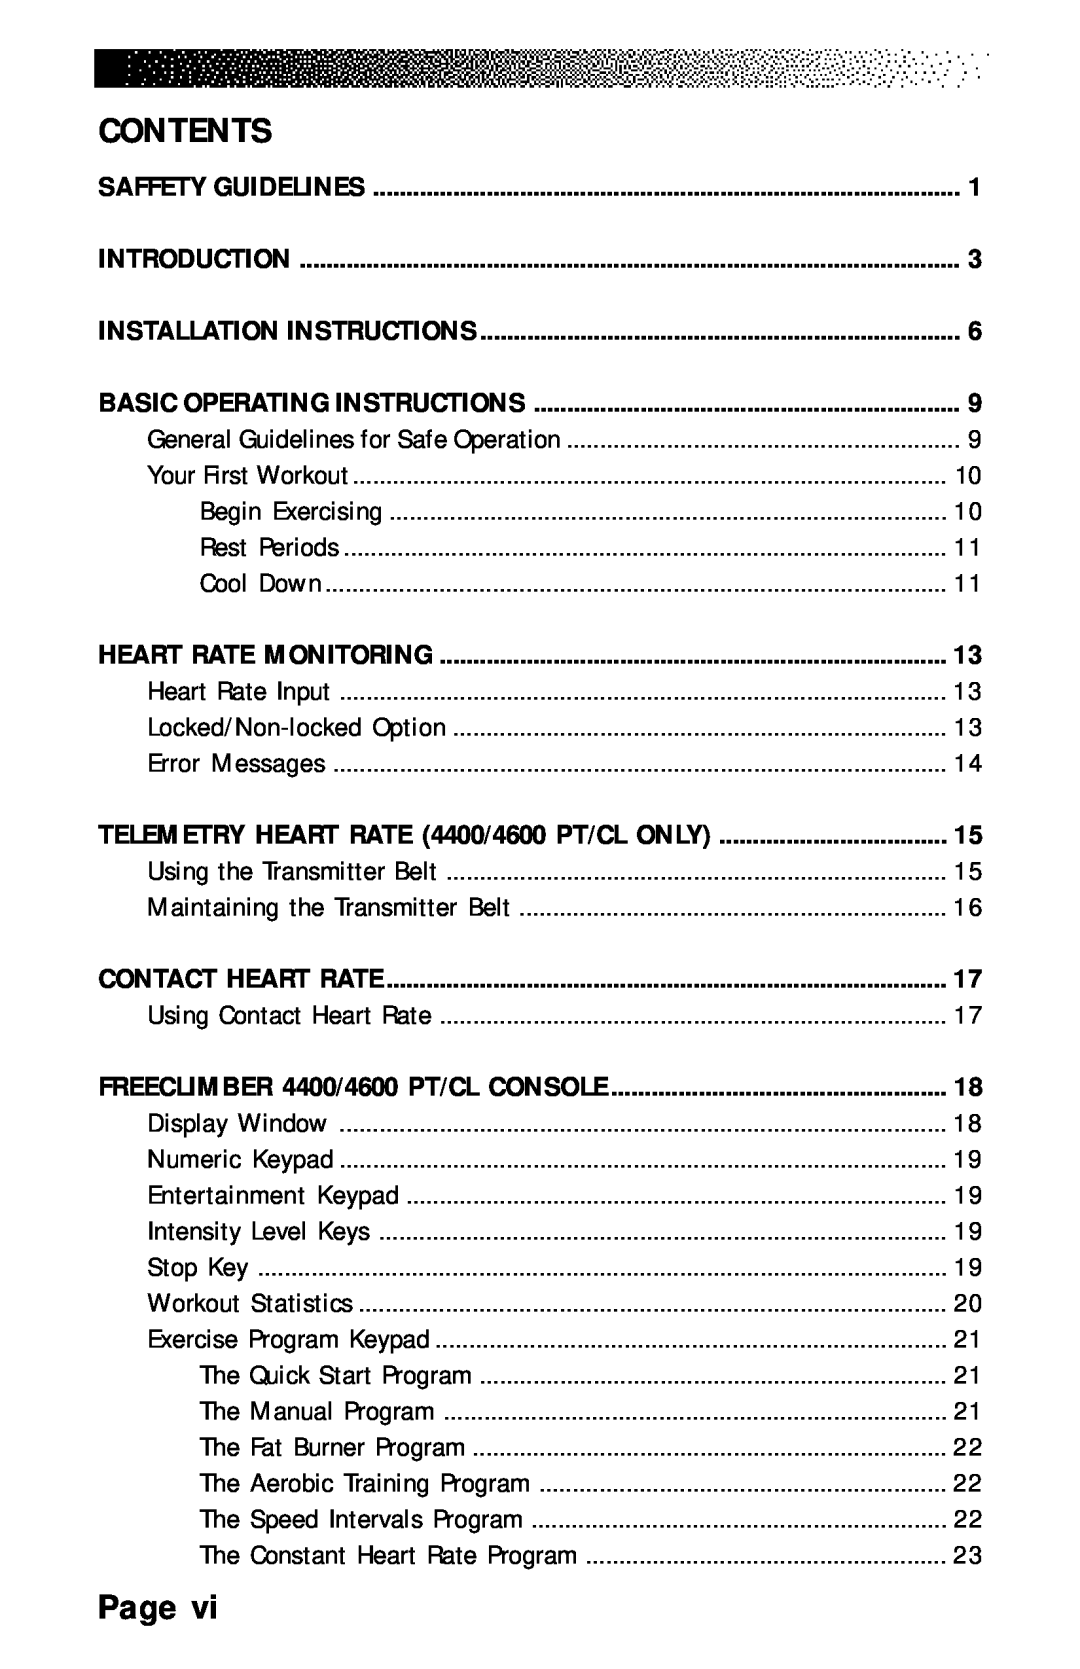 Stairmaster 4400 PT/CL Contents, Page, Saffety Guidelines, Introduction, Installation Instructions, Heart Rate Monitoring 